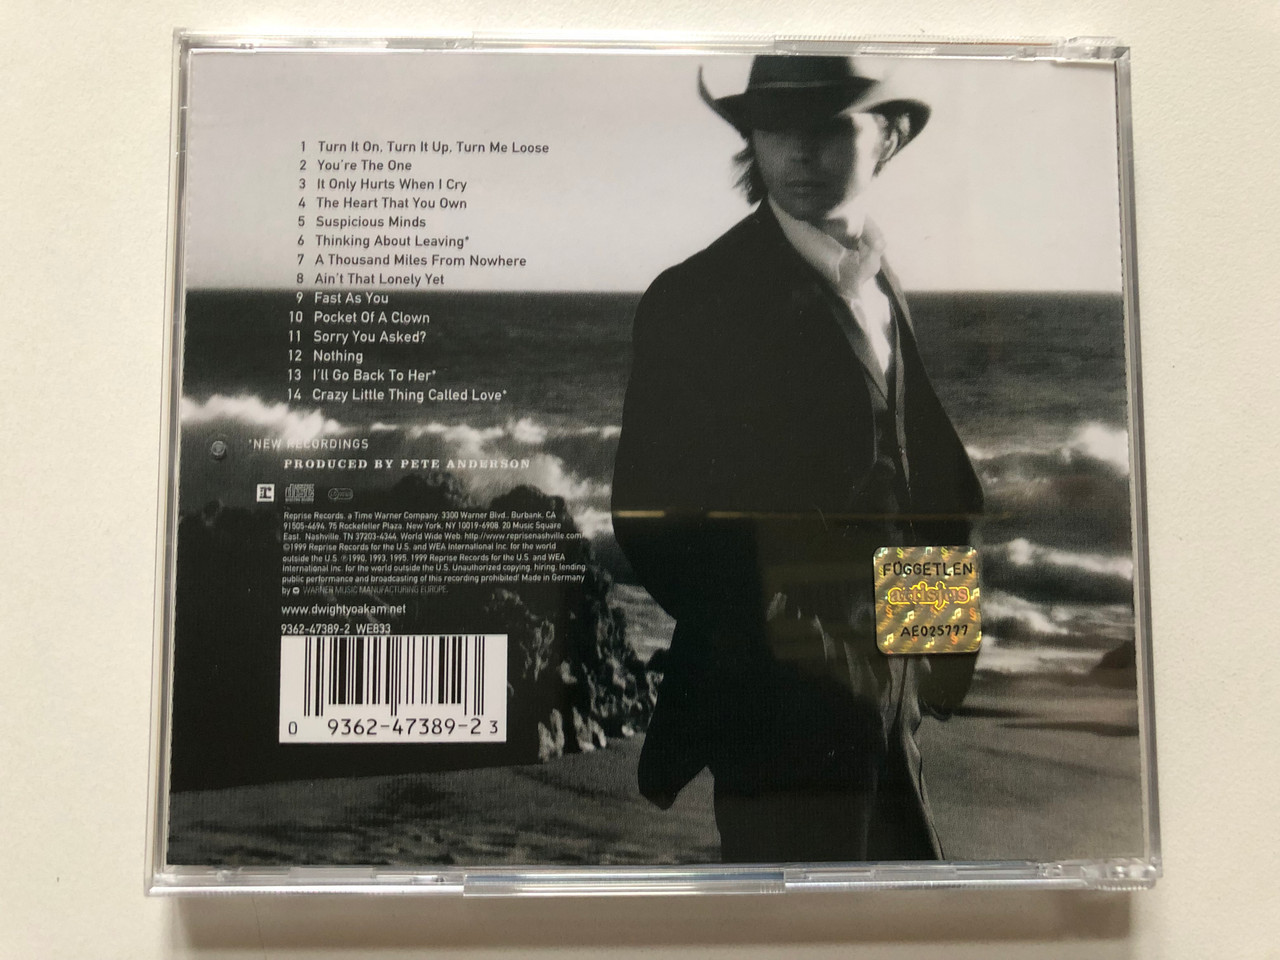 https://cdn11.bigcommerce.com/s-62bdpkt7pb/products/0/images/315071/Last_Chance_For_A_Thousand_Years_Dwight_Yoakams_Greatest_Hits_From_The_90s_Reprise_Records_Audio_CD_1999_9362-47389-2_2__13921.1701873076.1280.1280.JPG?c=2